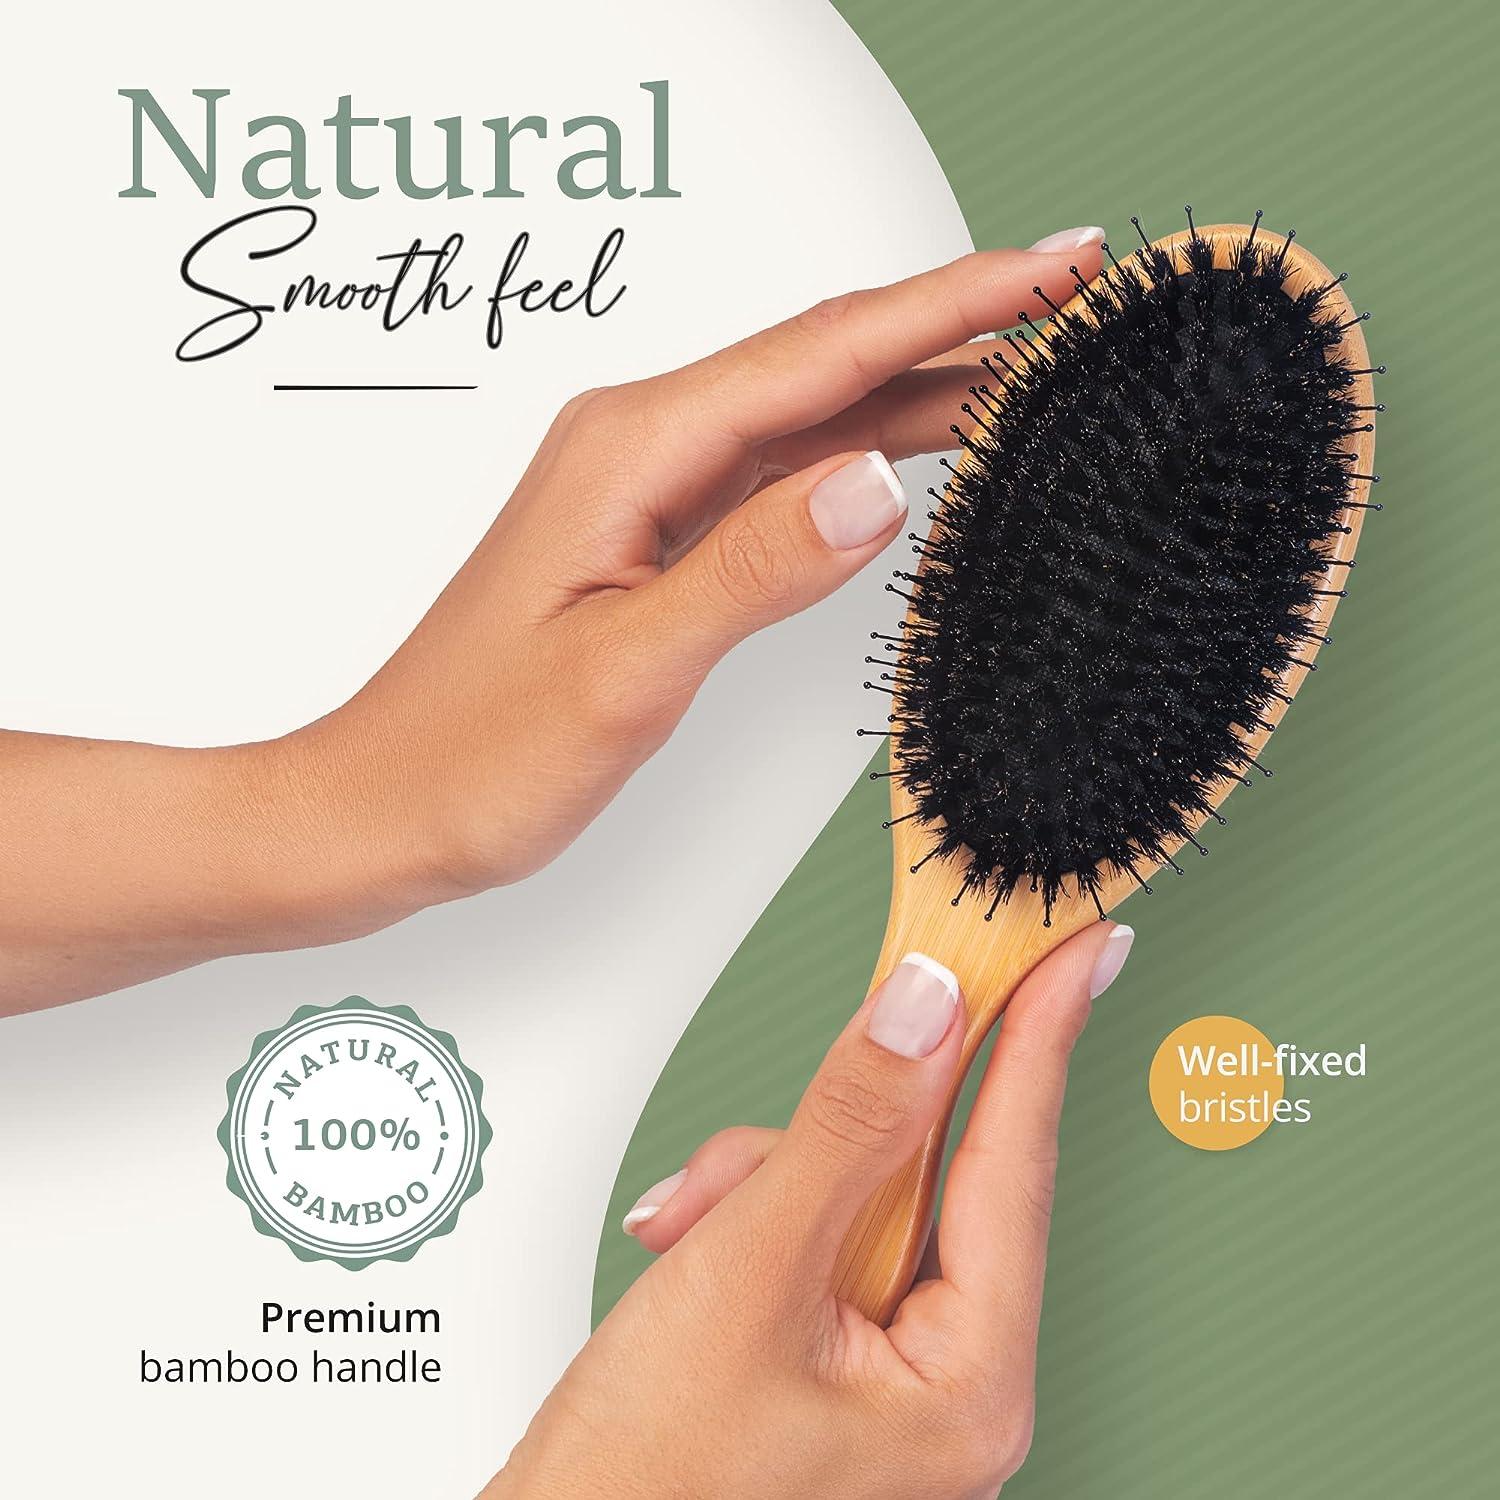 Belula 100% Boar Bristle Hair Brush Set. Soft Natural Bristles for Thin and  Fine Hair. Restore Shine And Texture. Wooden Comb, Travel Bag and Spa  Headband Included!